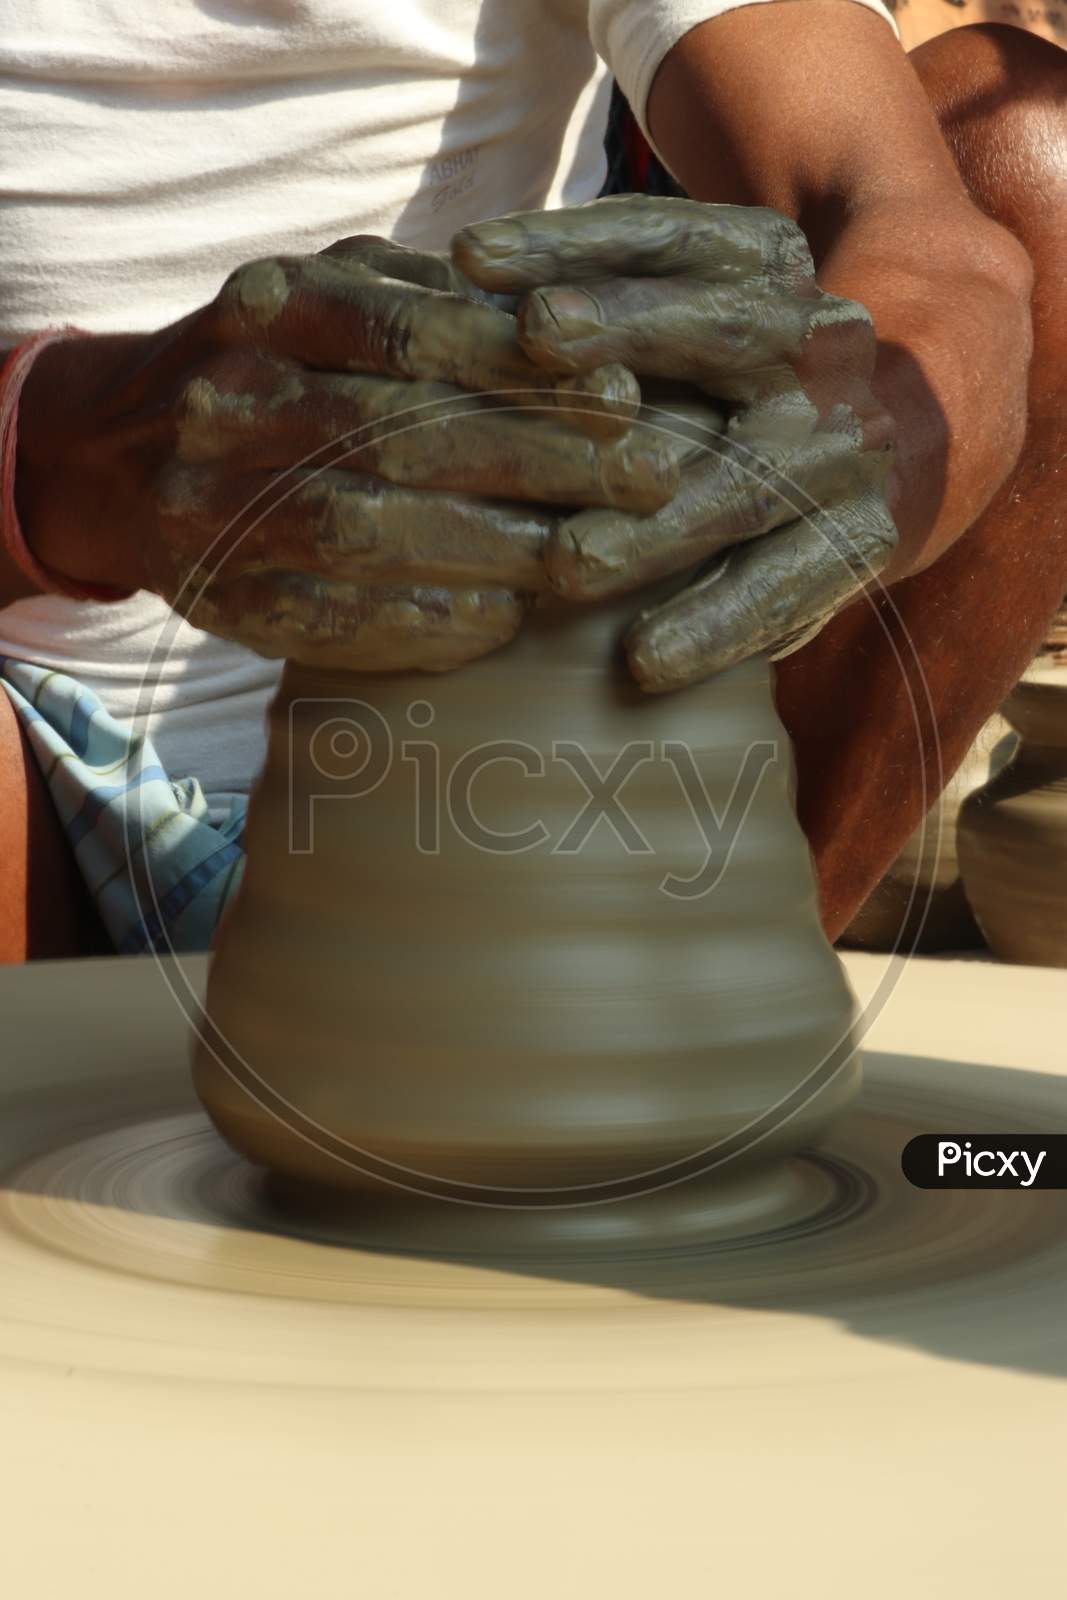 A Potter Making Pots From Clay In Rural Villages